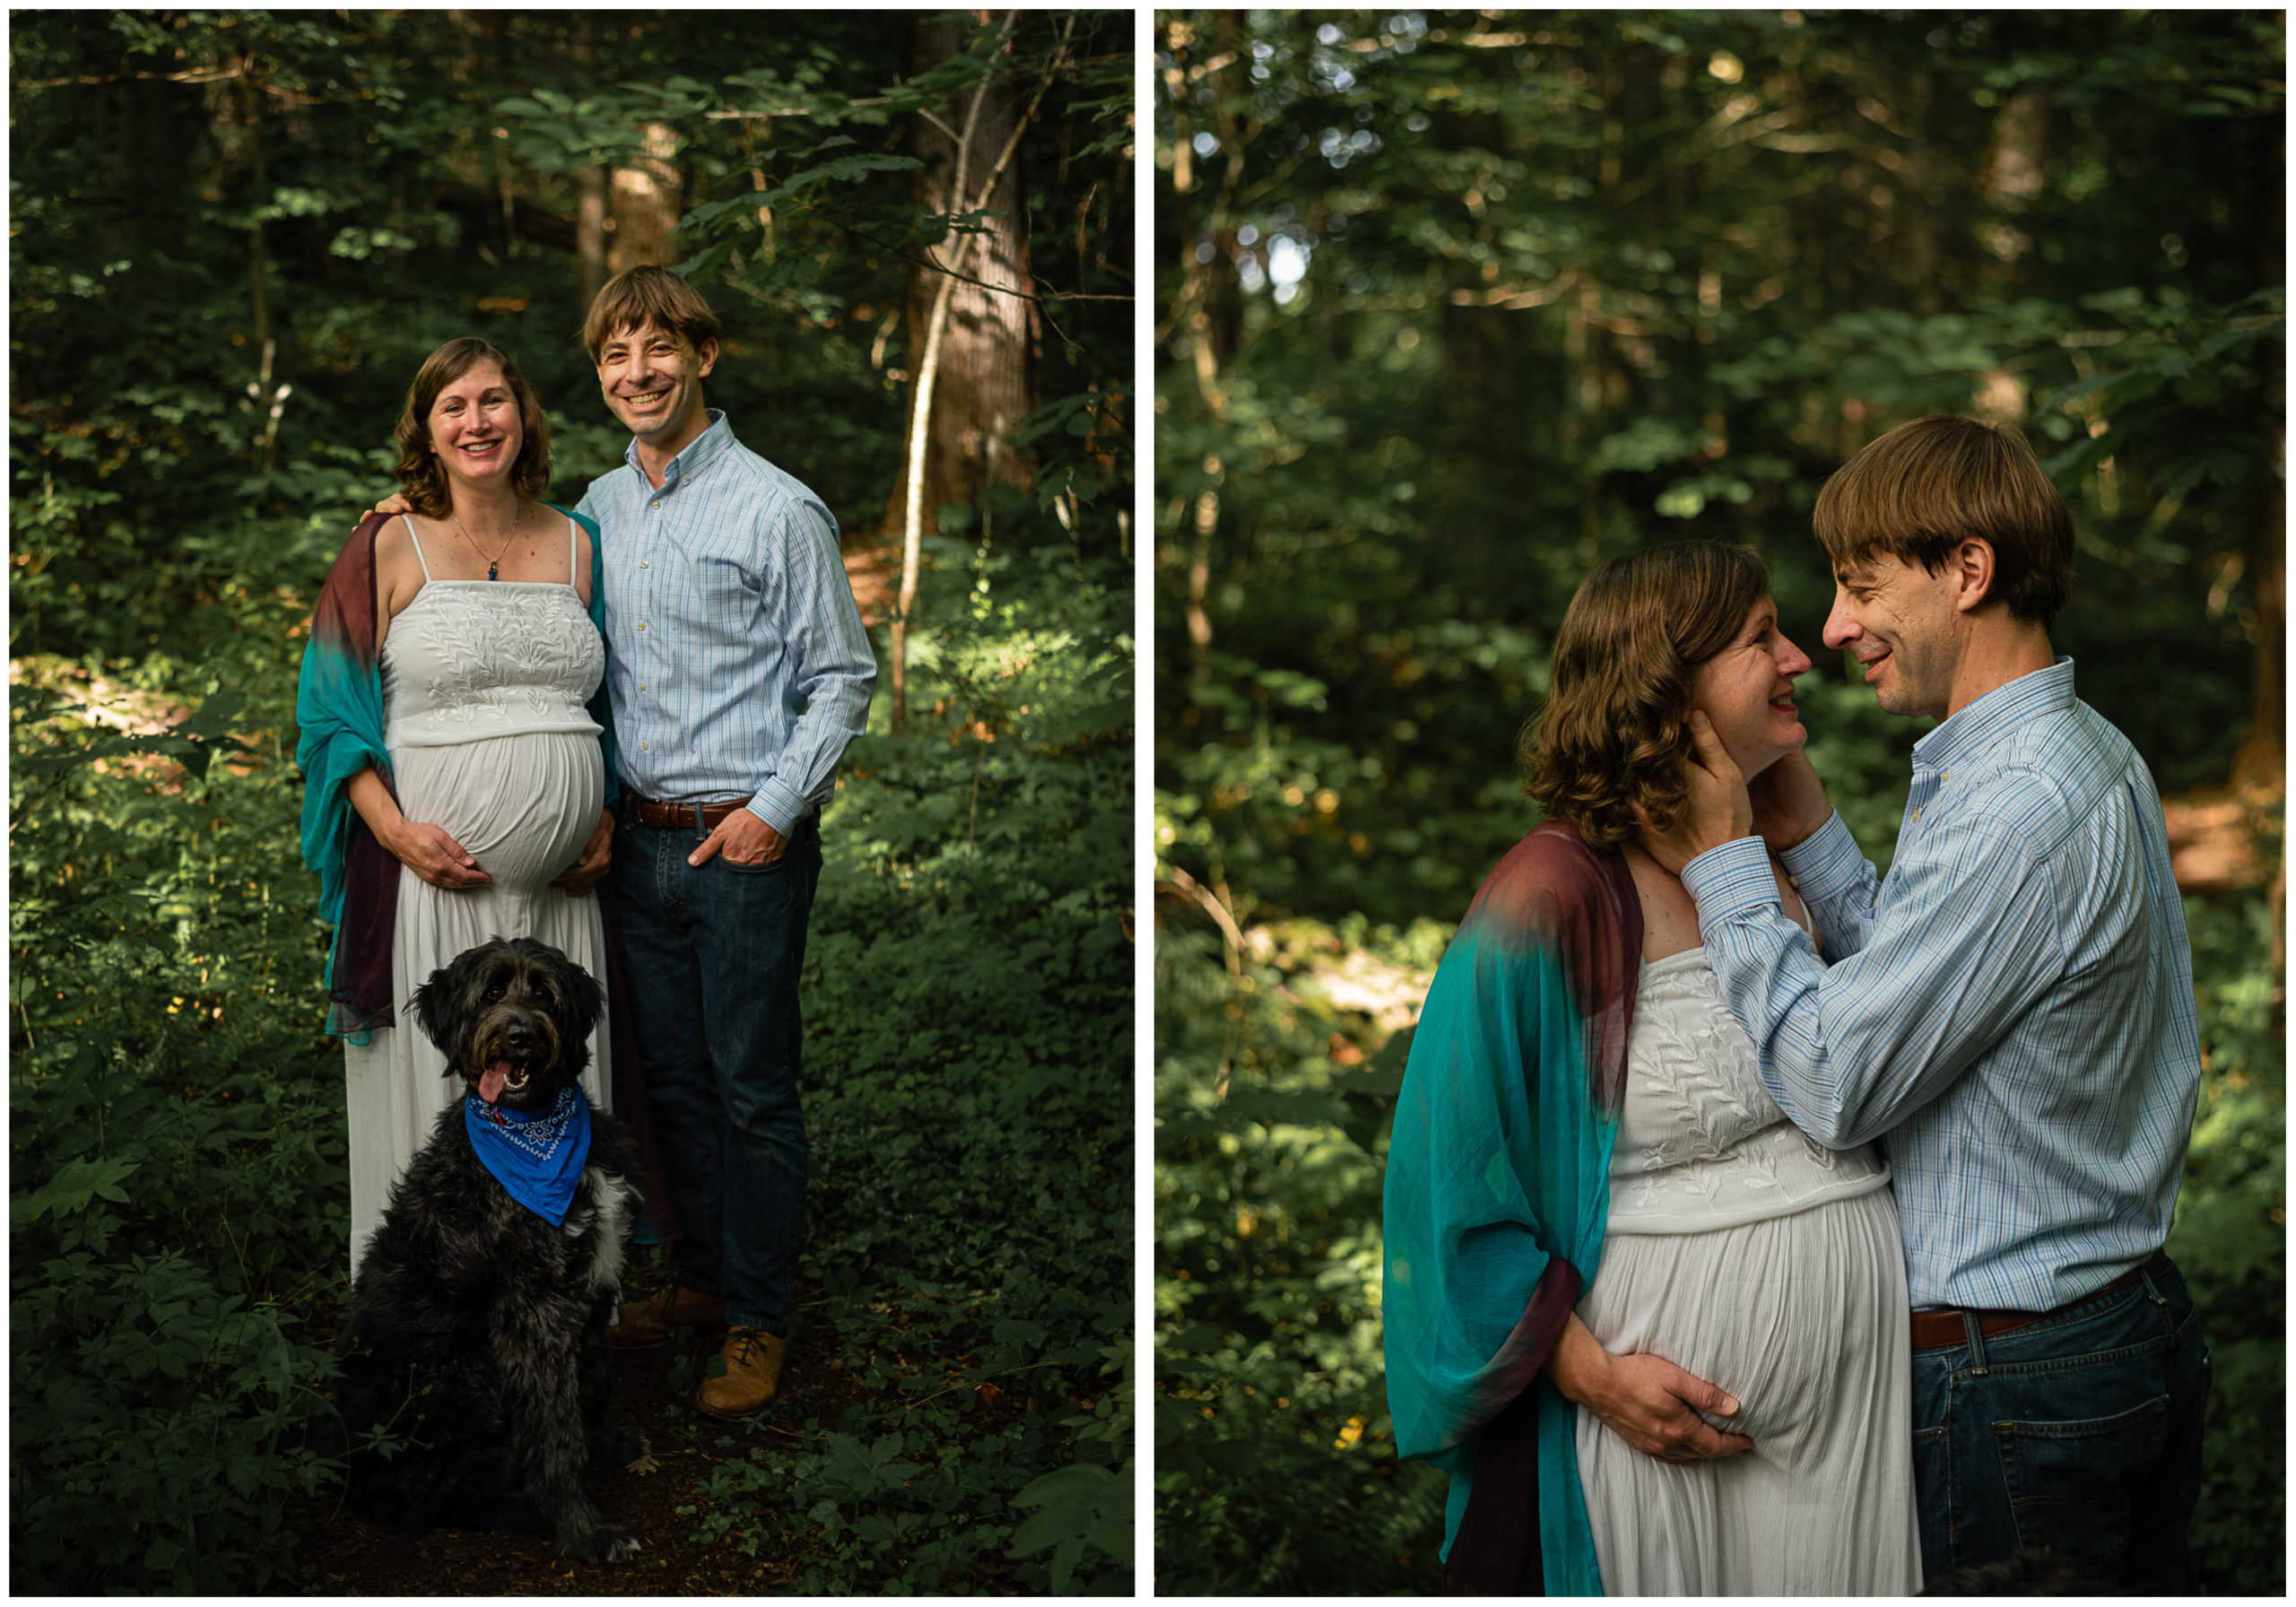 Maternity photos of a couple and their large black dog.